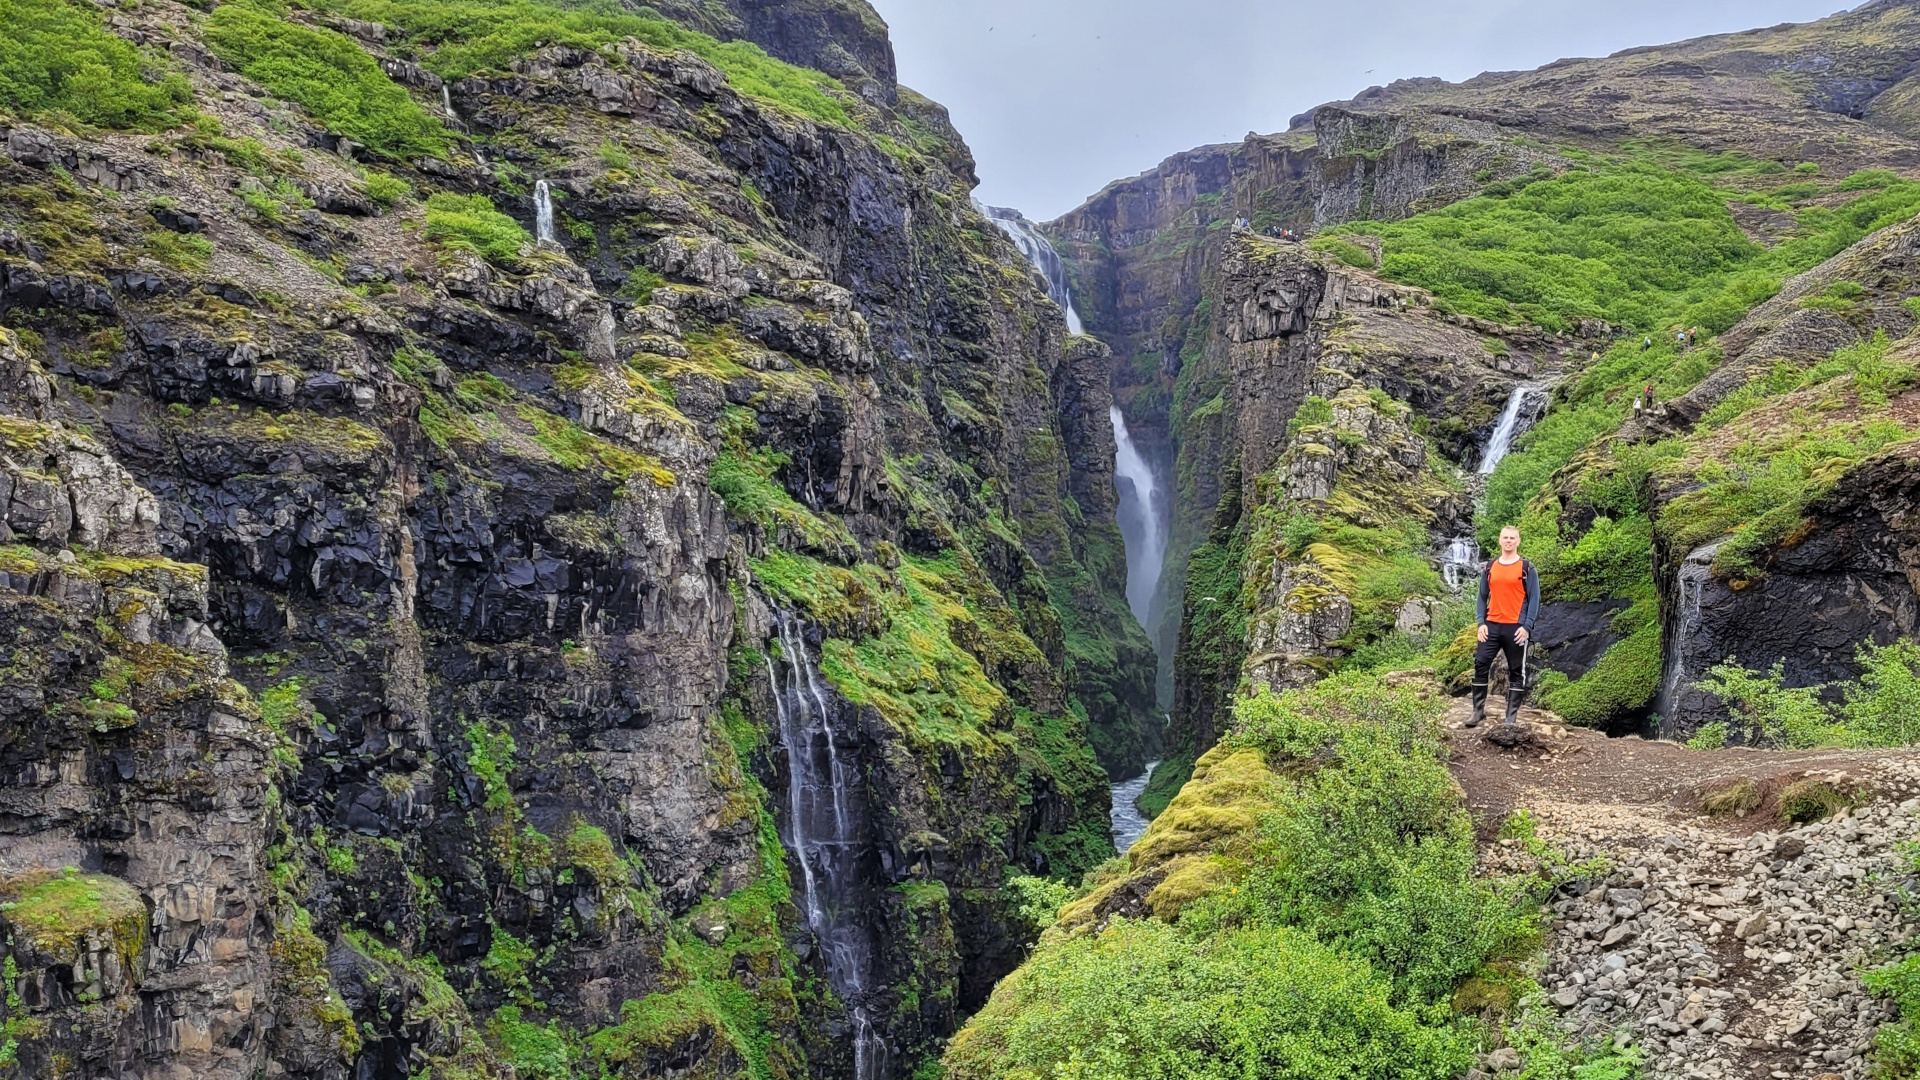 Glymur waterfall hike including two river crossings. The most challenging hike I have ever made!